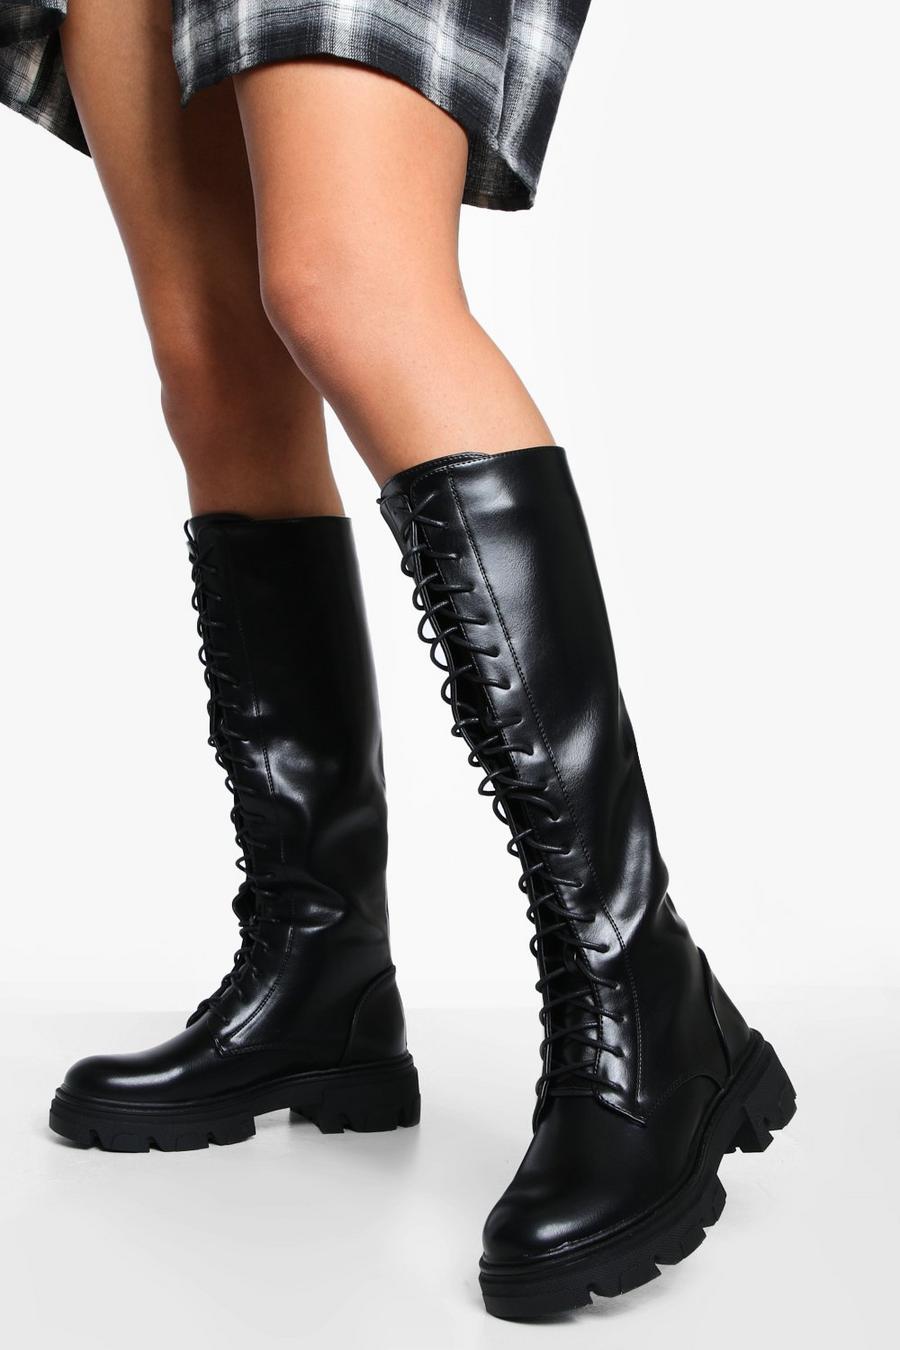 Black Lace Up Chunky Knee High Boots